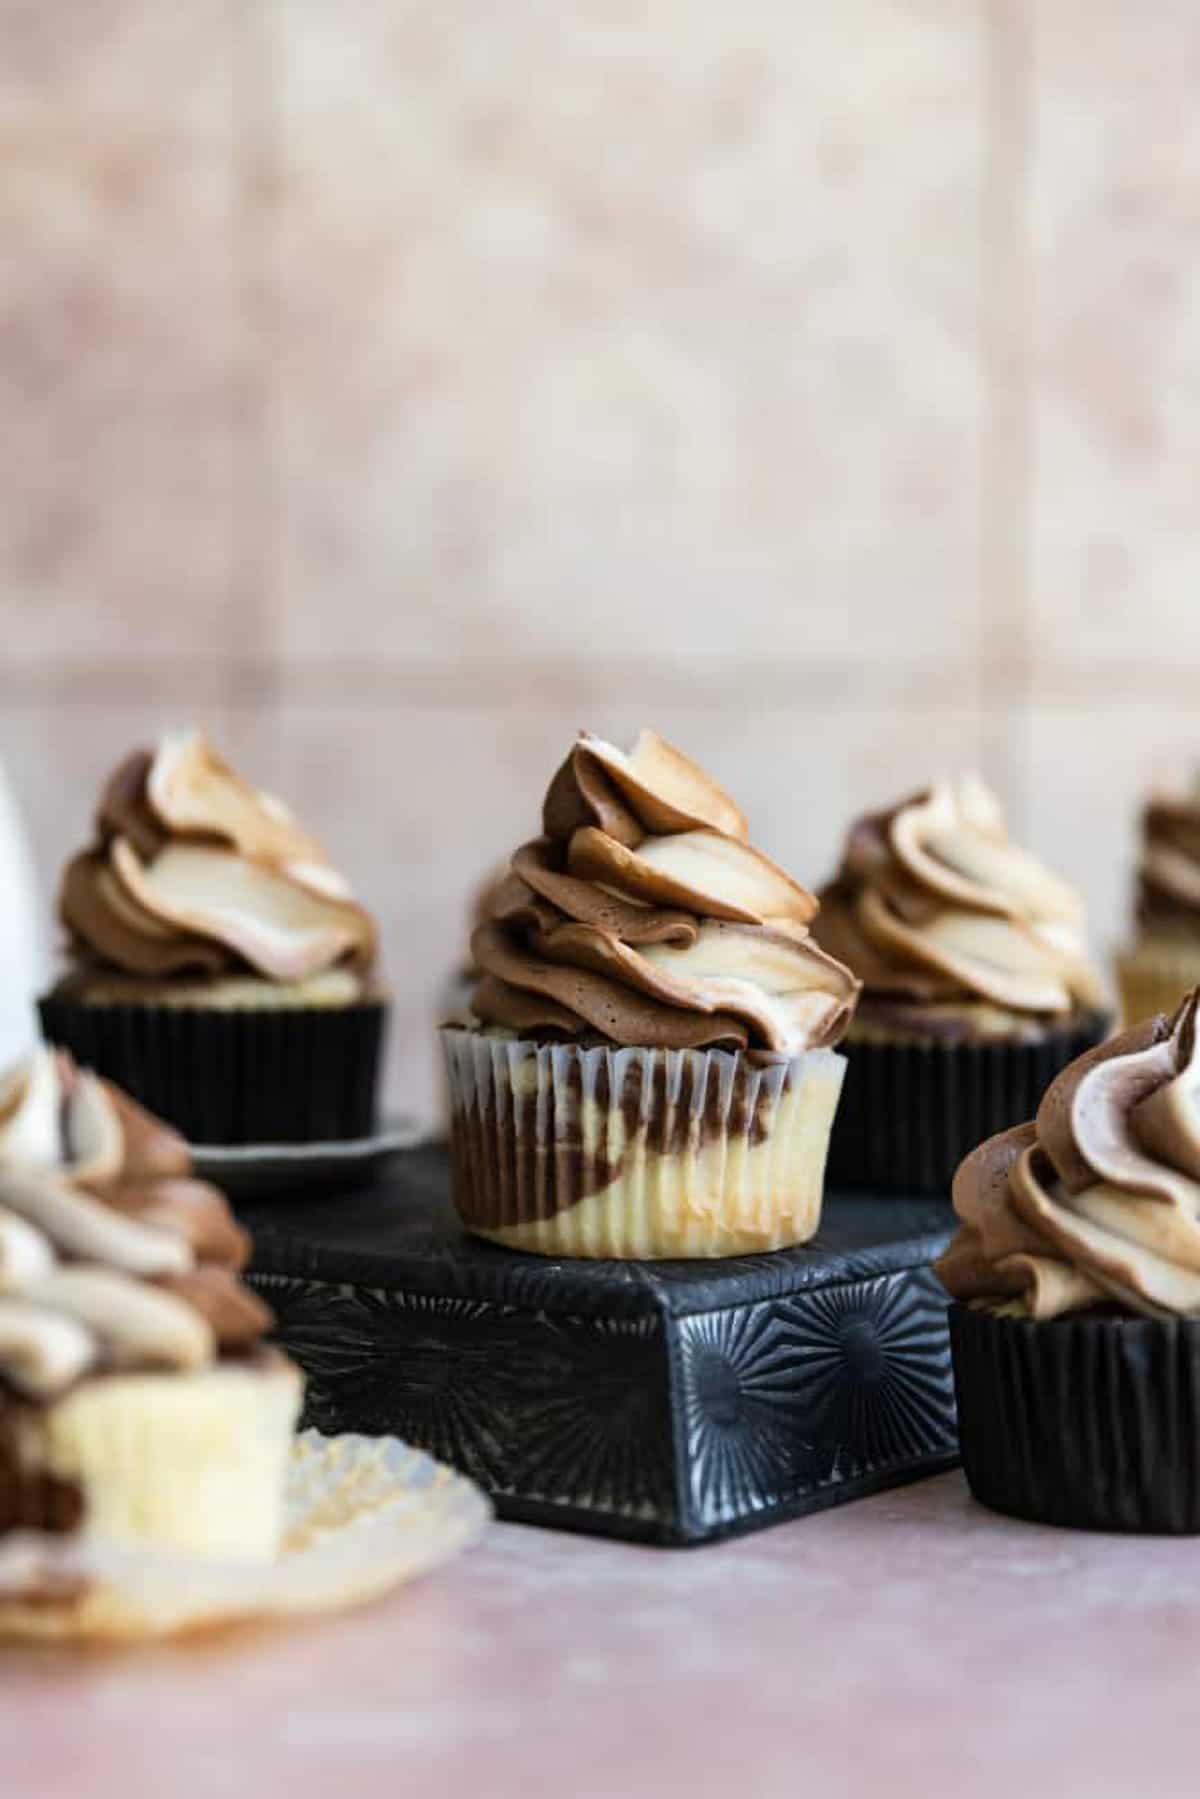 Vanilla & chocolate marble cupcakes with vanilla & chocolate marble swirled frosting on small black platform stands.